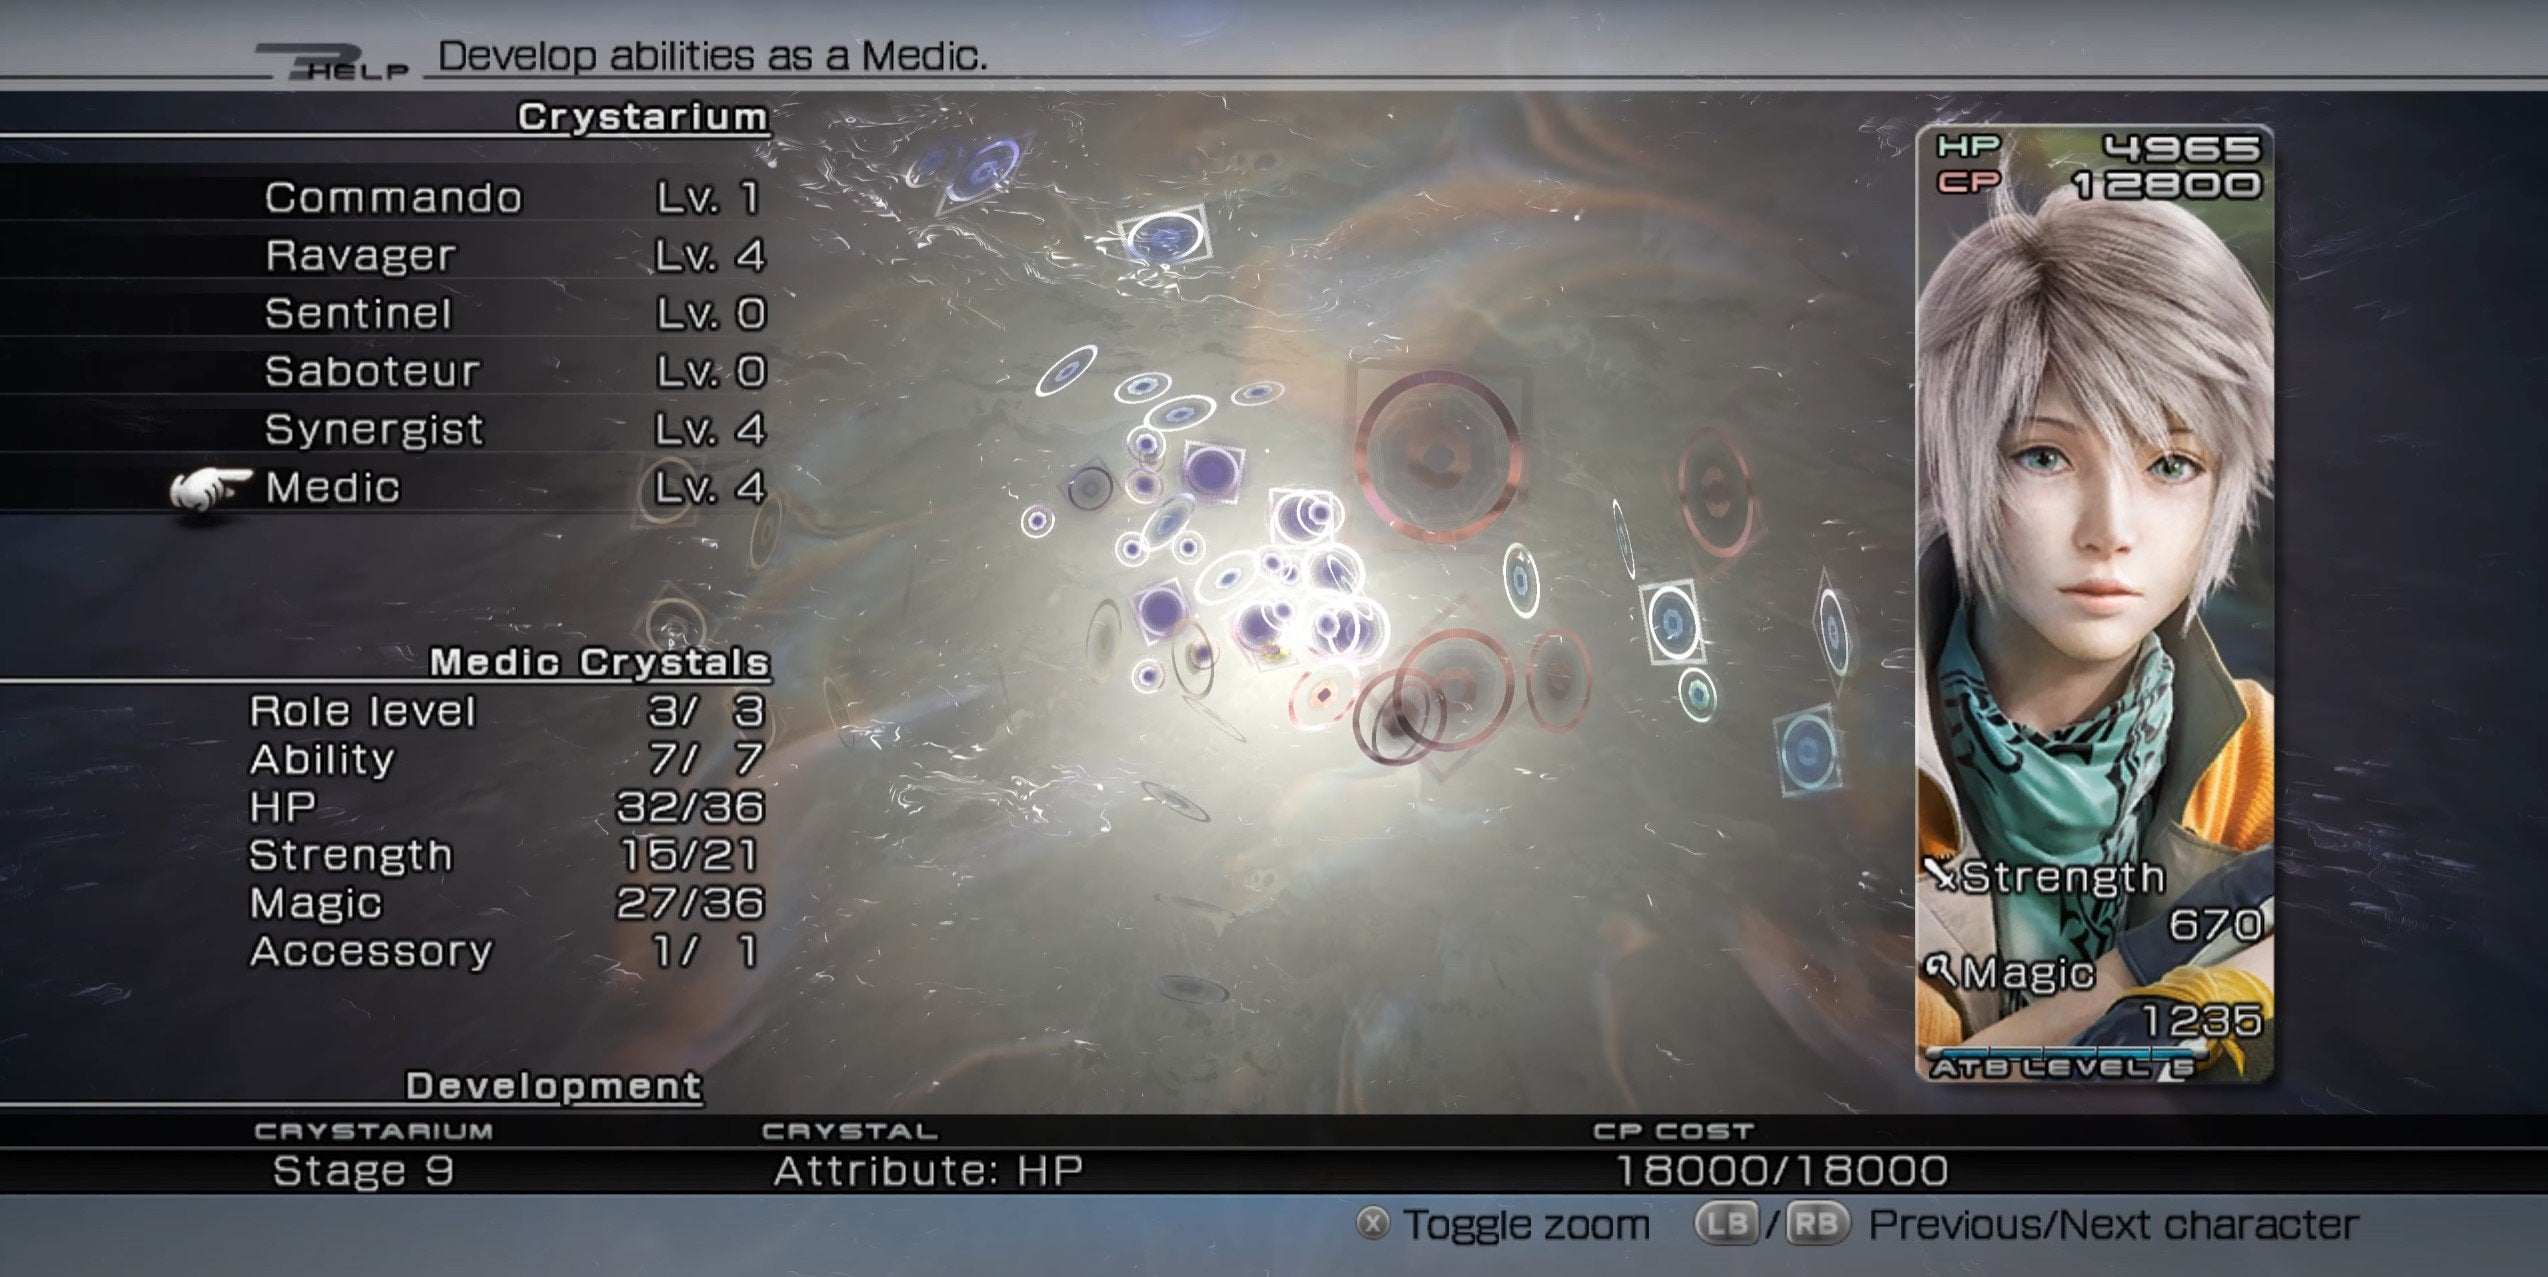 The Crystarium screen for Hope in Final Fantasy XIII.